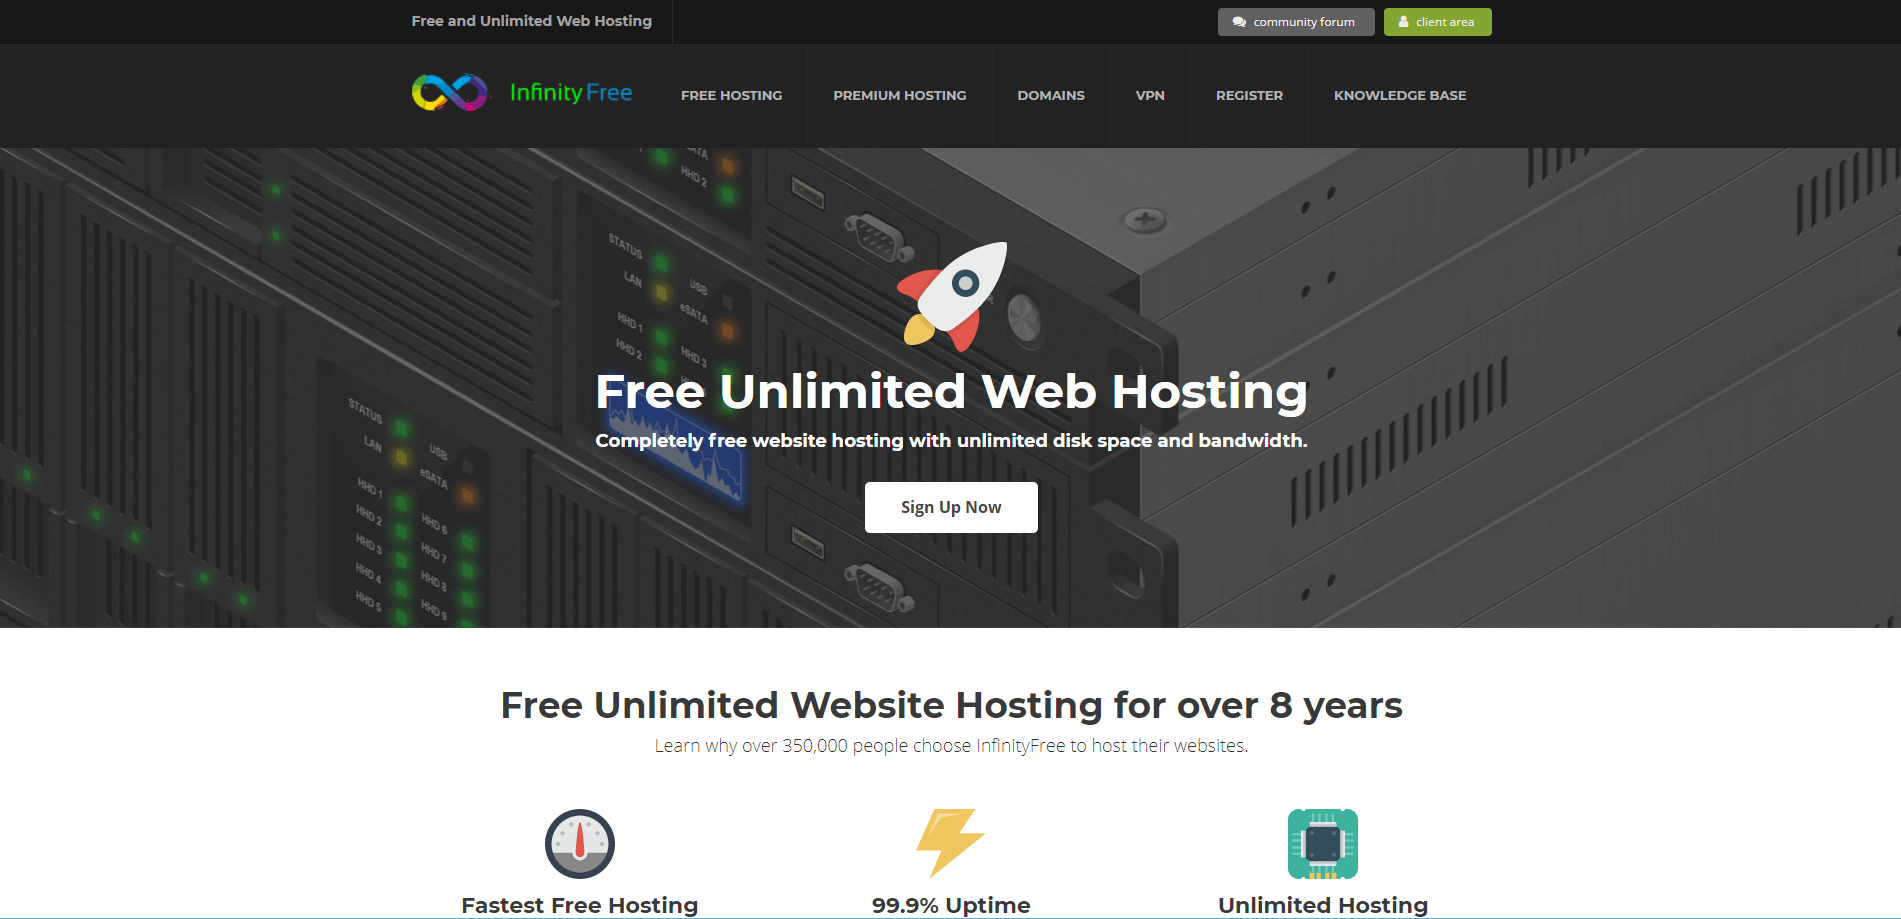 10 Free Website Hosting Services to Consider in